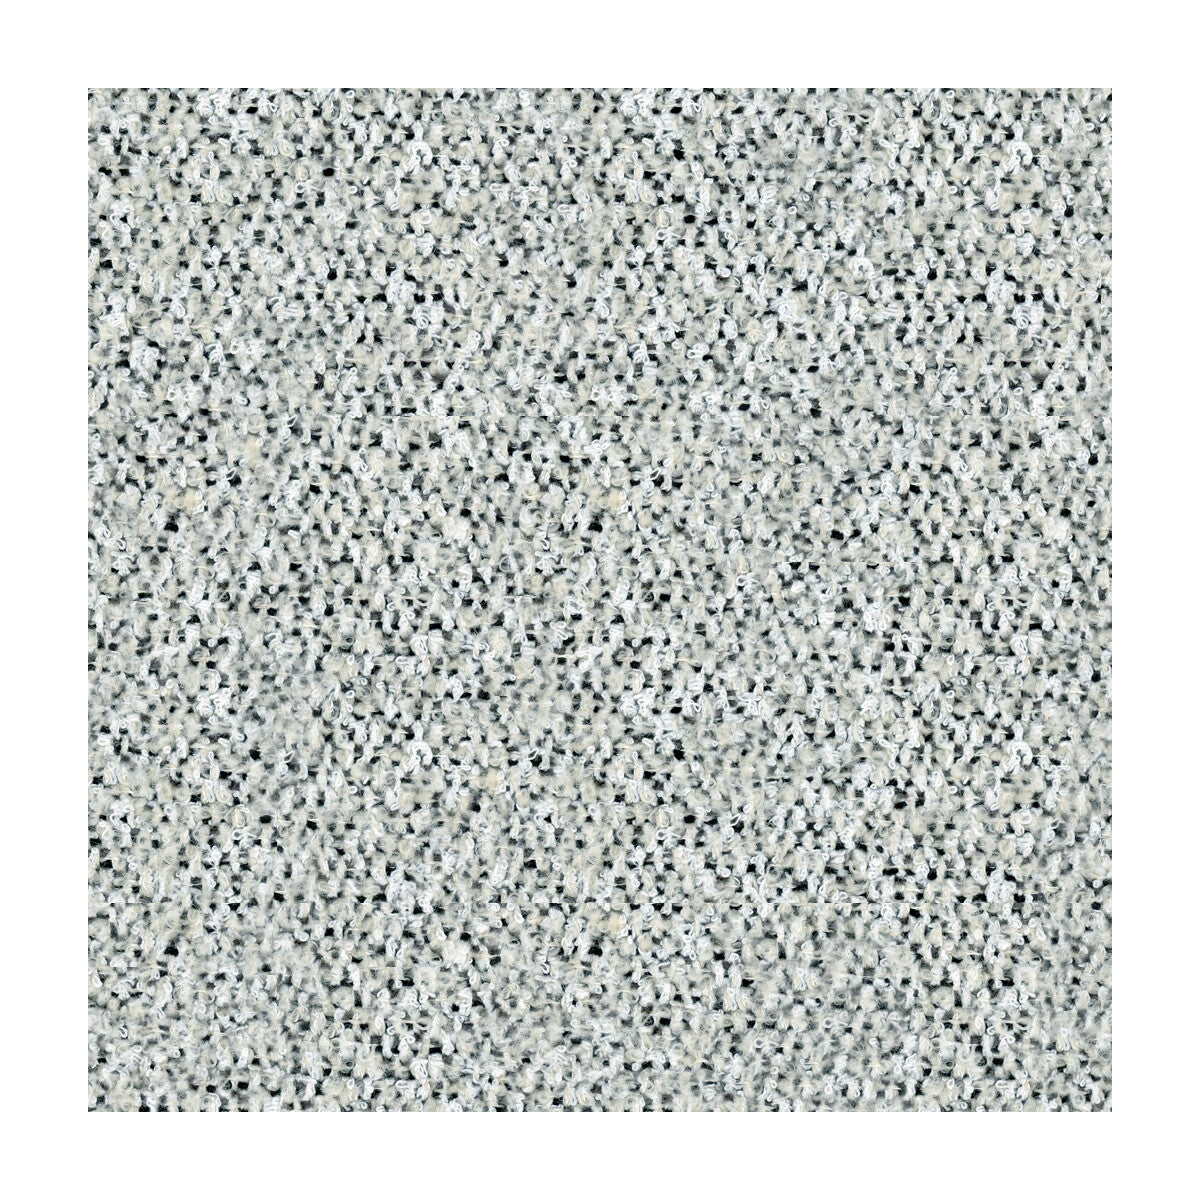 Tessellate fabric in ivory/black color - pattern GWF-3527.18.0 - by Lee Jofa Modern in the Kelly Wearstler III collection